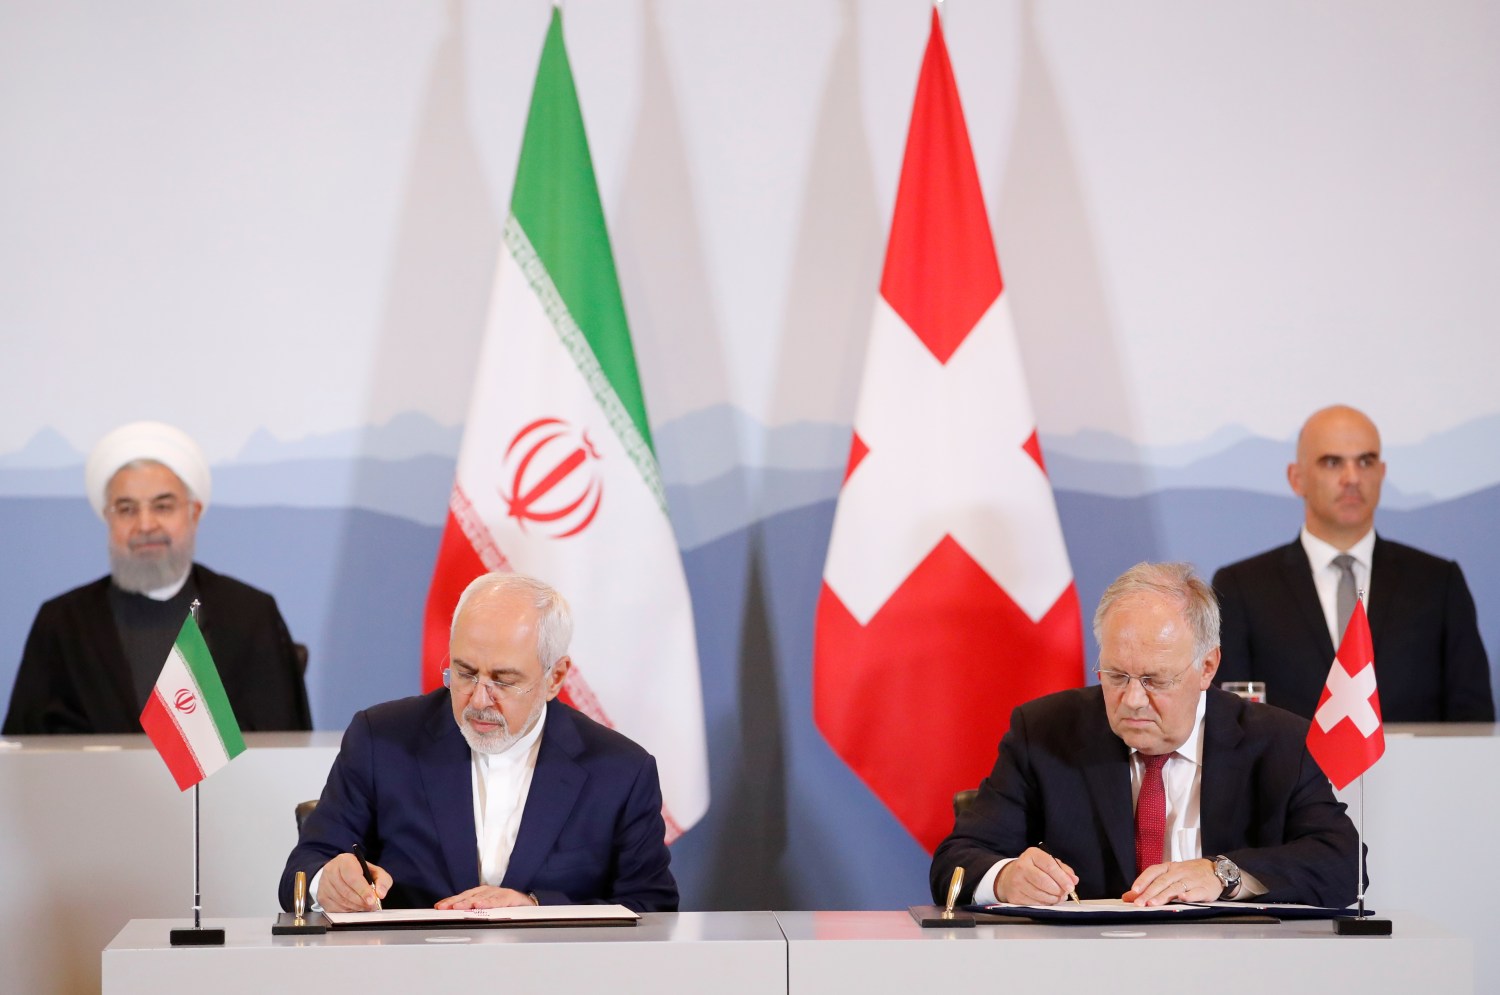 Swiss President Alain Berset and Iranian President Hassan Rouhani look on as Johann N. Schneider-Ammann, Head of the Federal Department of Economic Affairs, Education and research and Iran's Foreign Minister Mohammad Javad Zarif sign documents during an official visit in Bern, Switzerland, July 3, 2018. REUTERS/Denis Balibouse